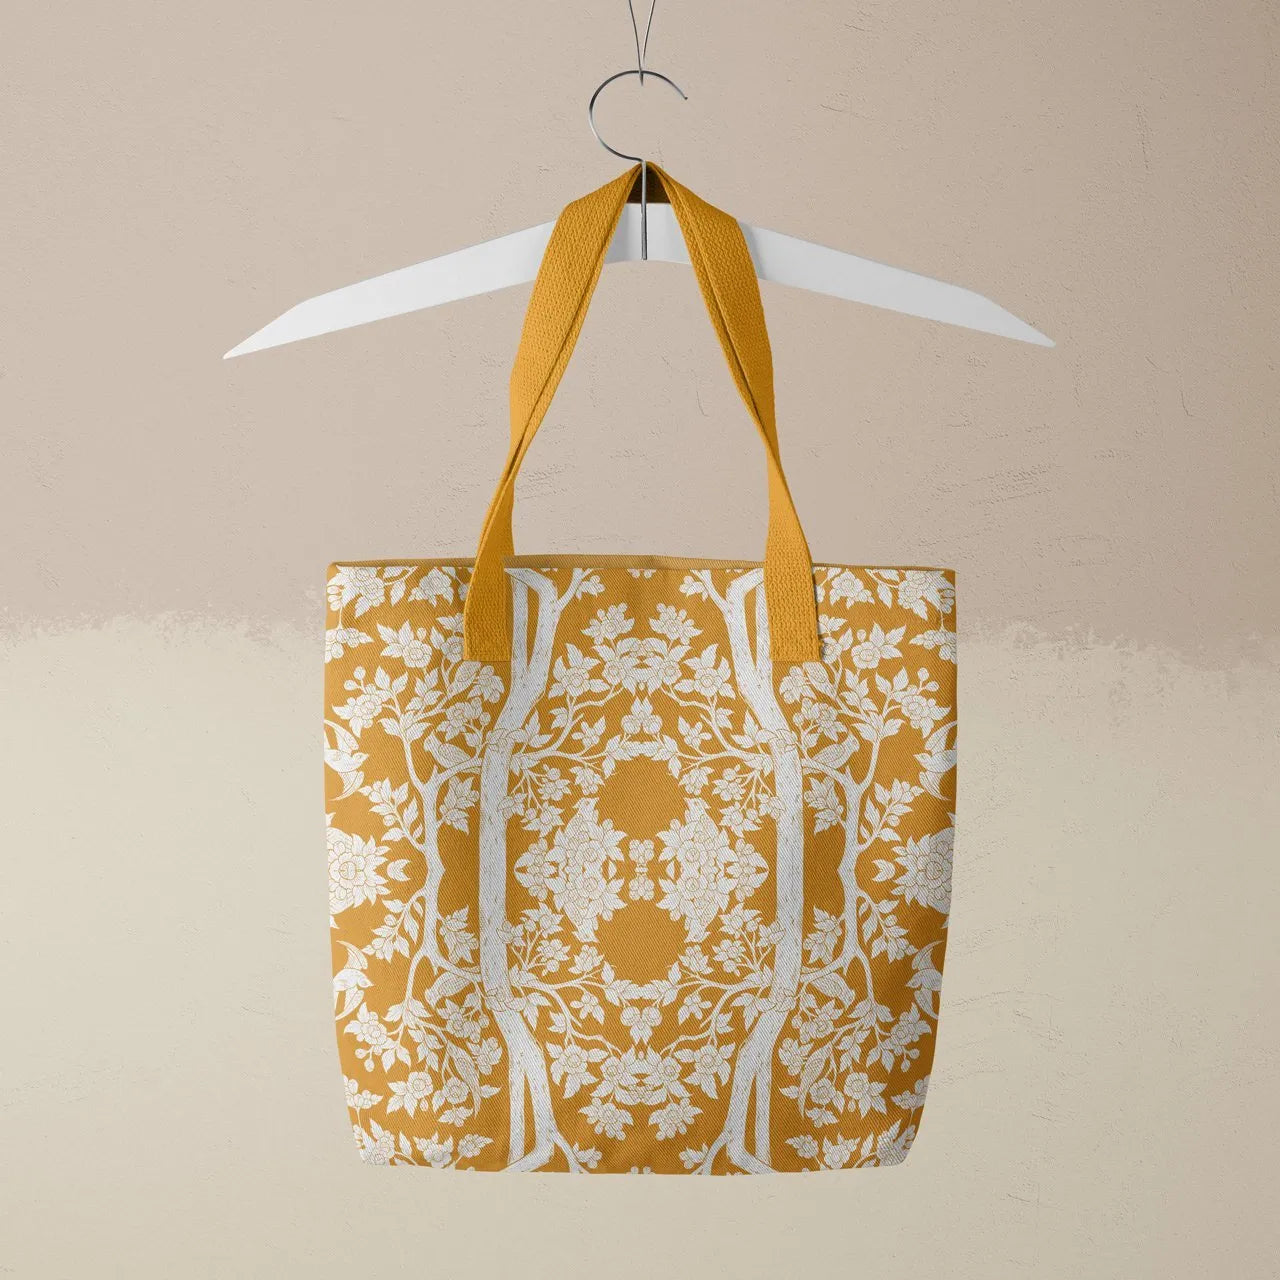 Aviary Tote - Goldfinch - Heavy Duty Reusable Grocery Bag - Shopping Totes - Aesthetic Art